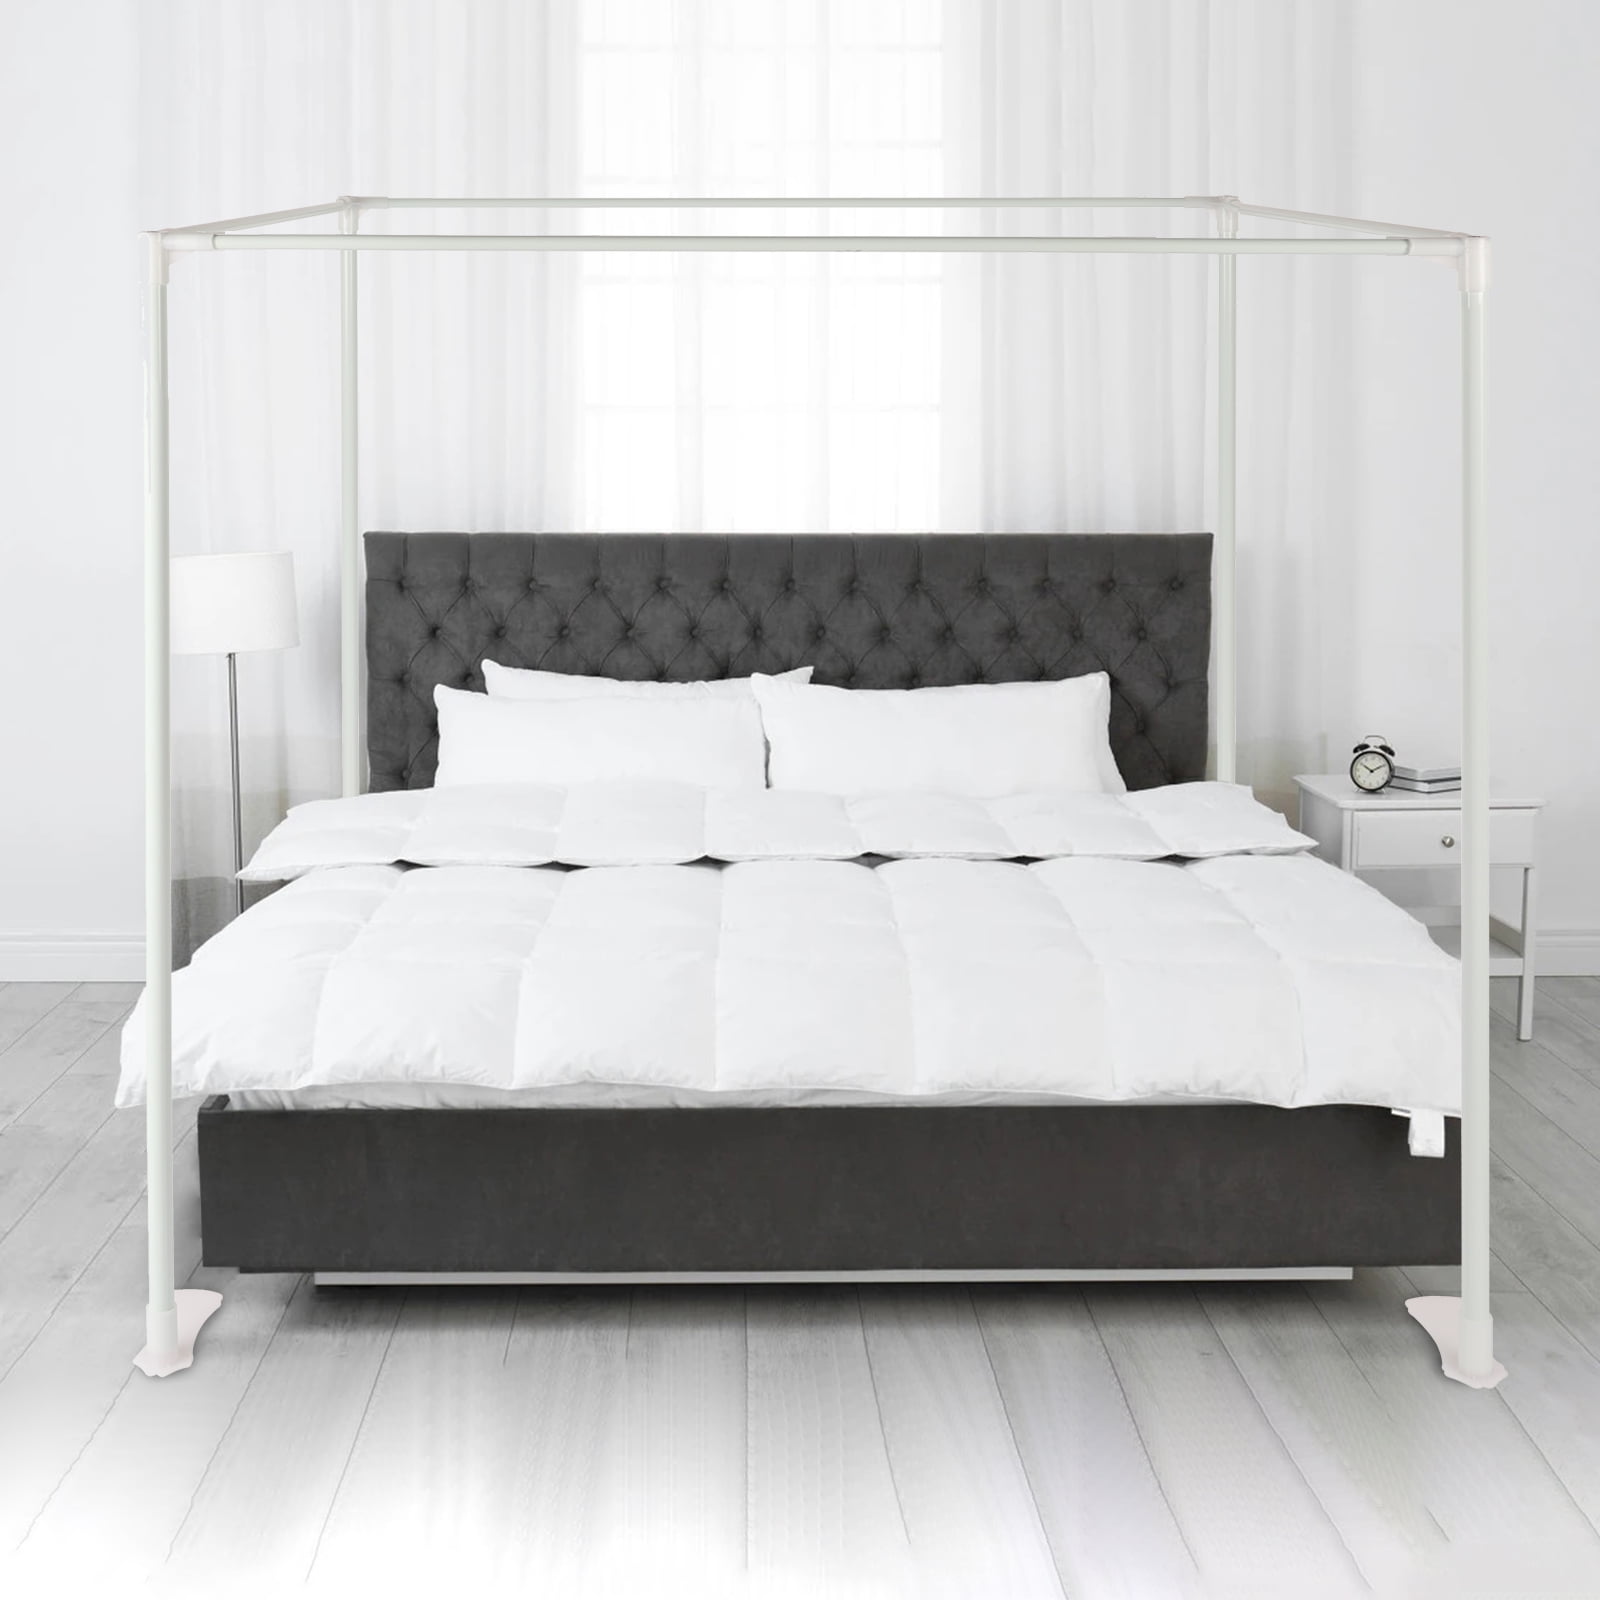 Stainless Steel Bed Mosquito Netting Canopy Frame Post Twin Full Queen King Size 